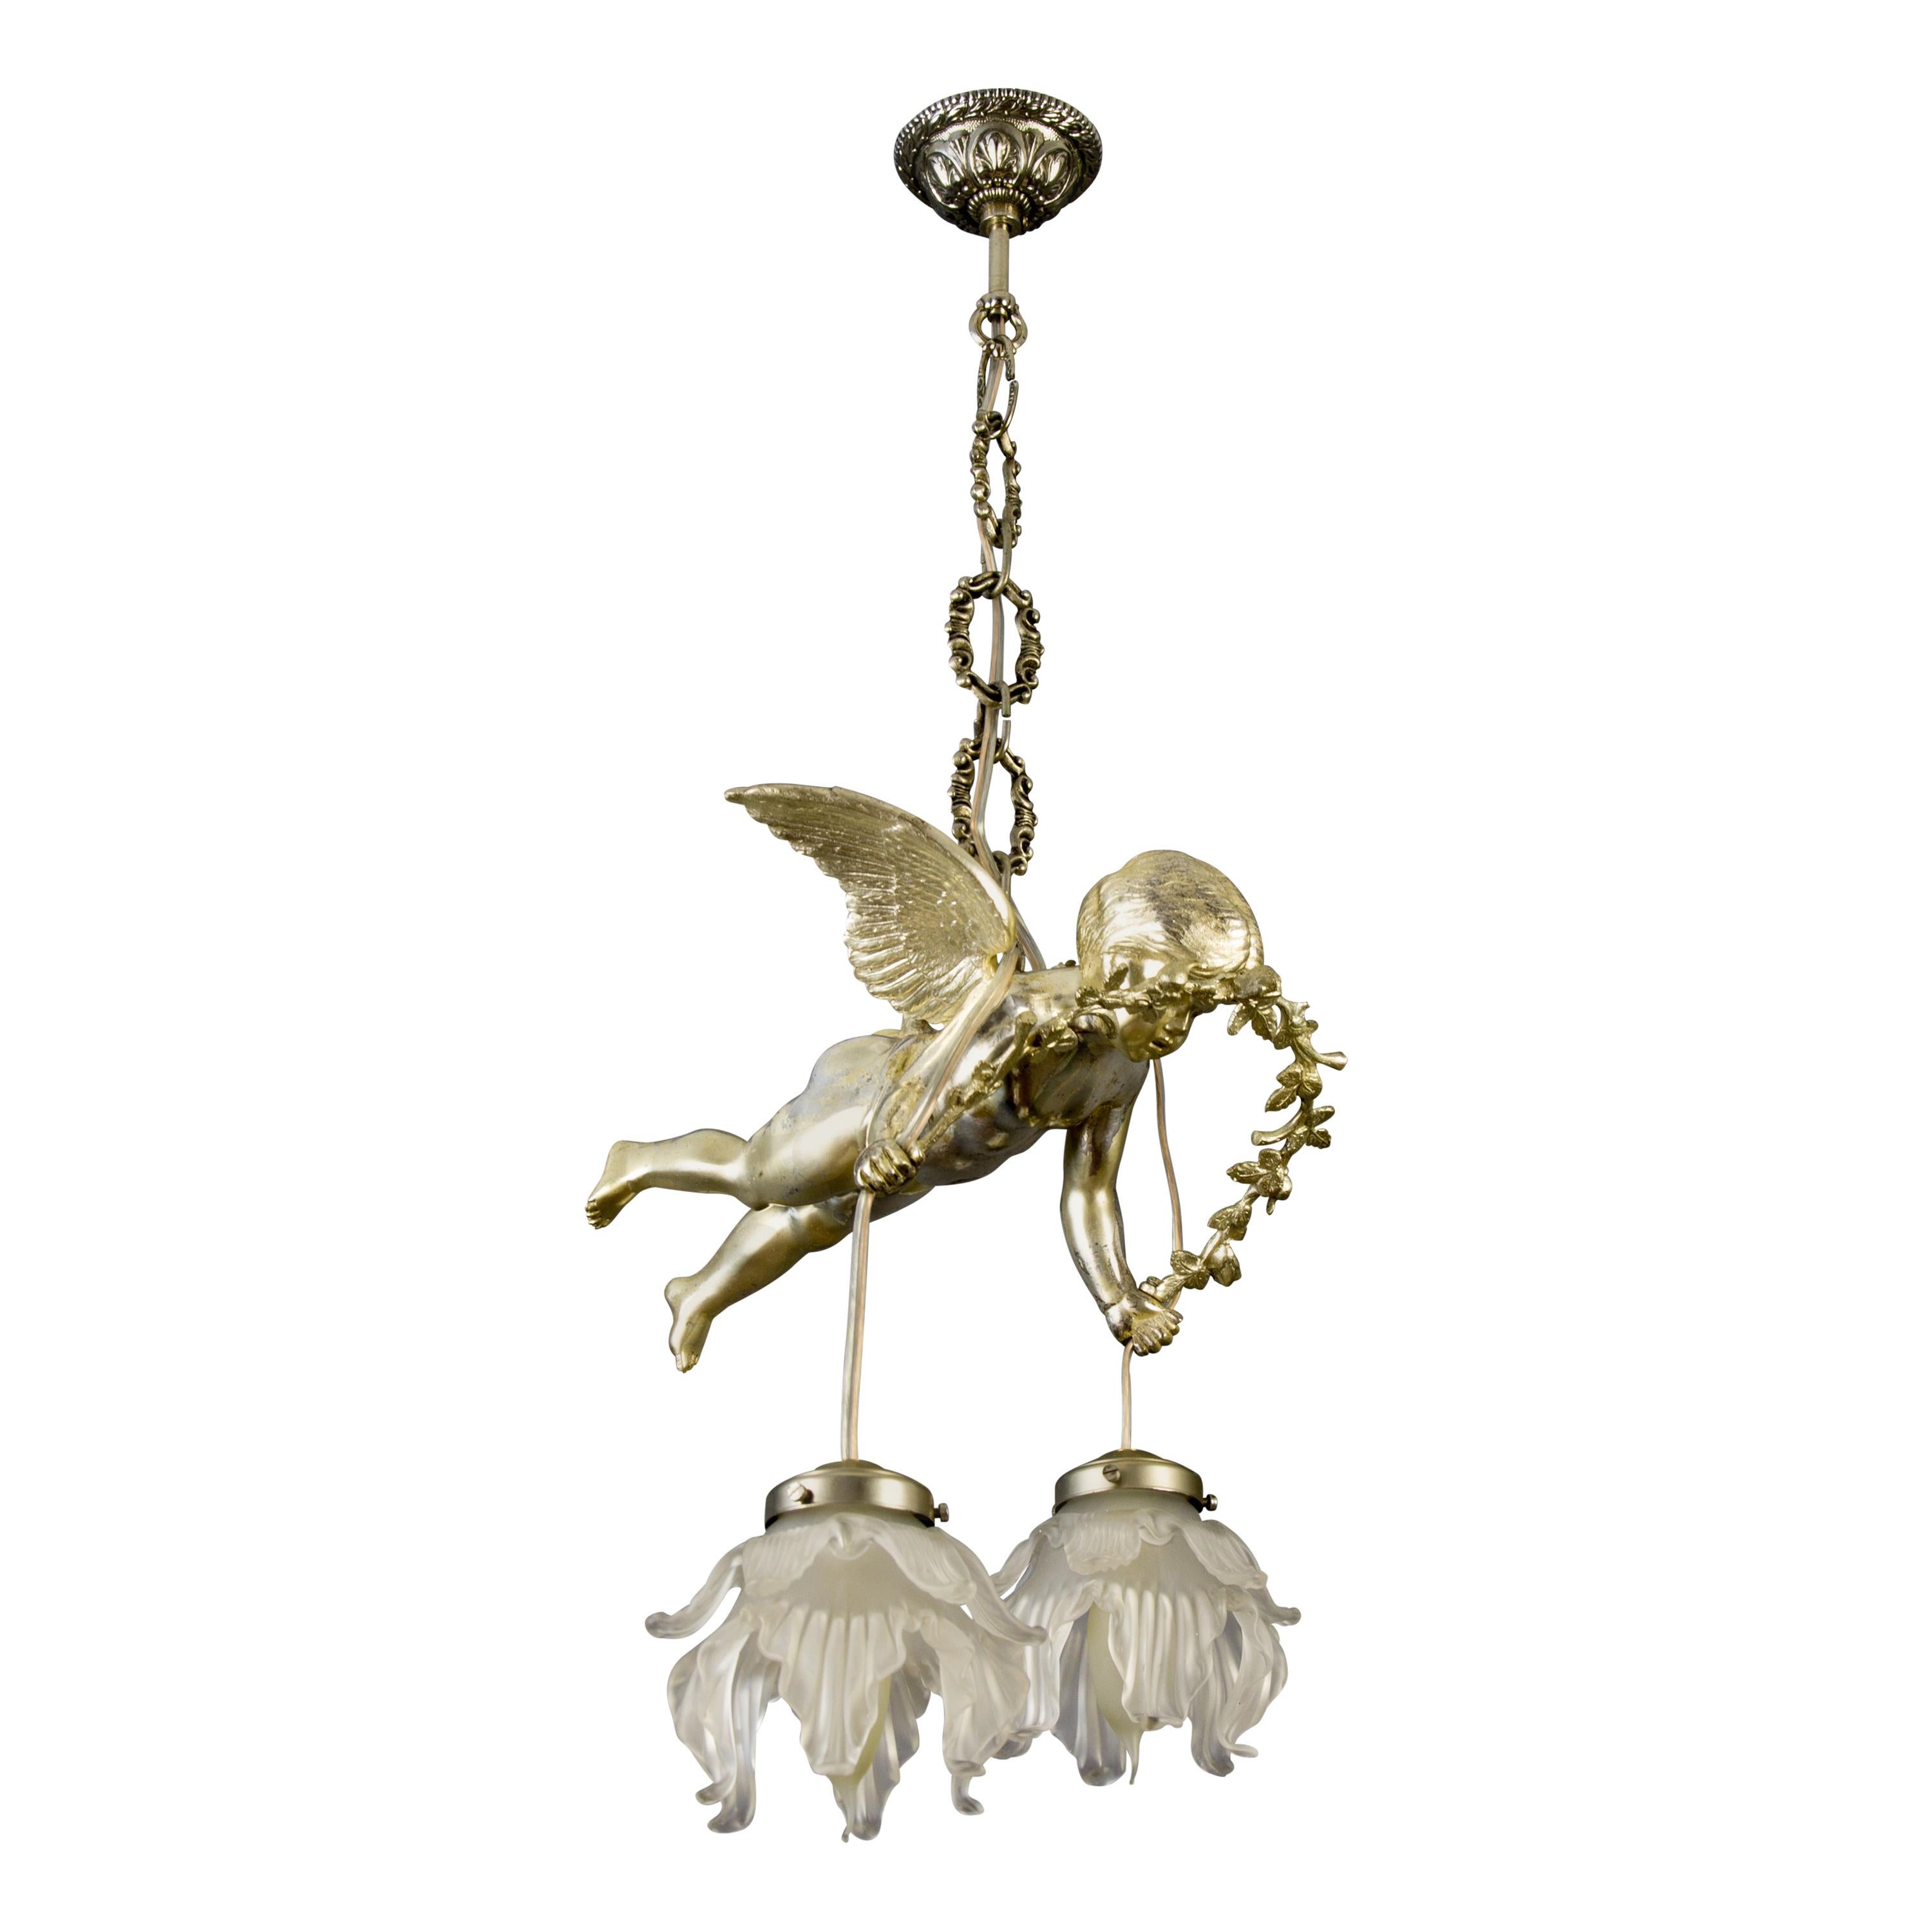 French Silver Color Bronze Cherub Two-Light Ceiling Light Fixture, 1920s